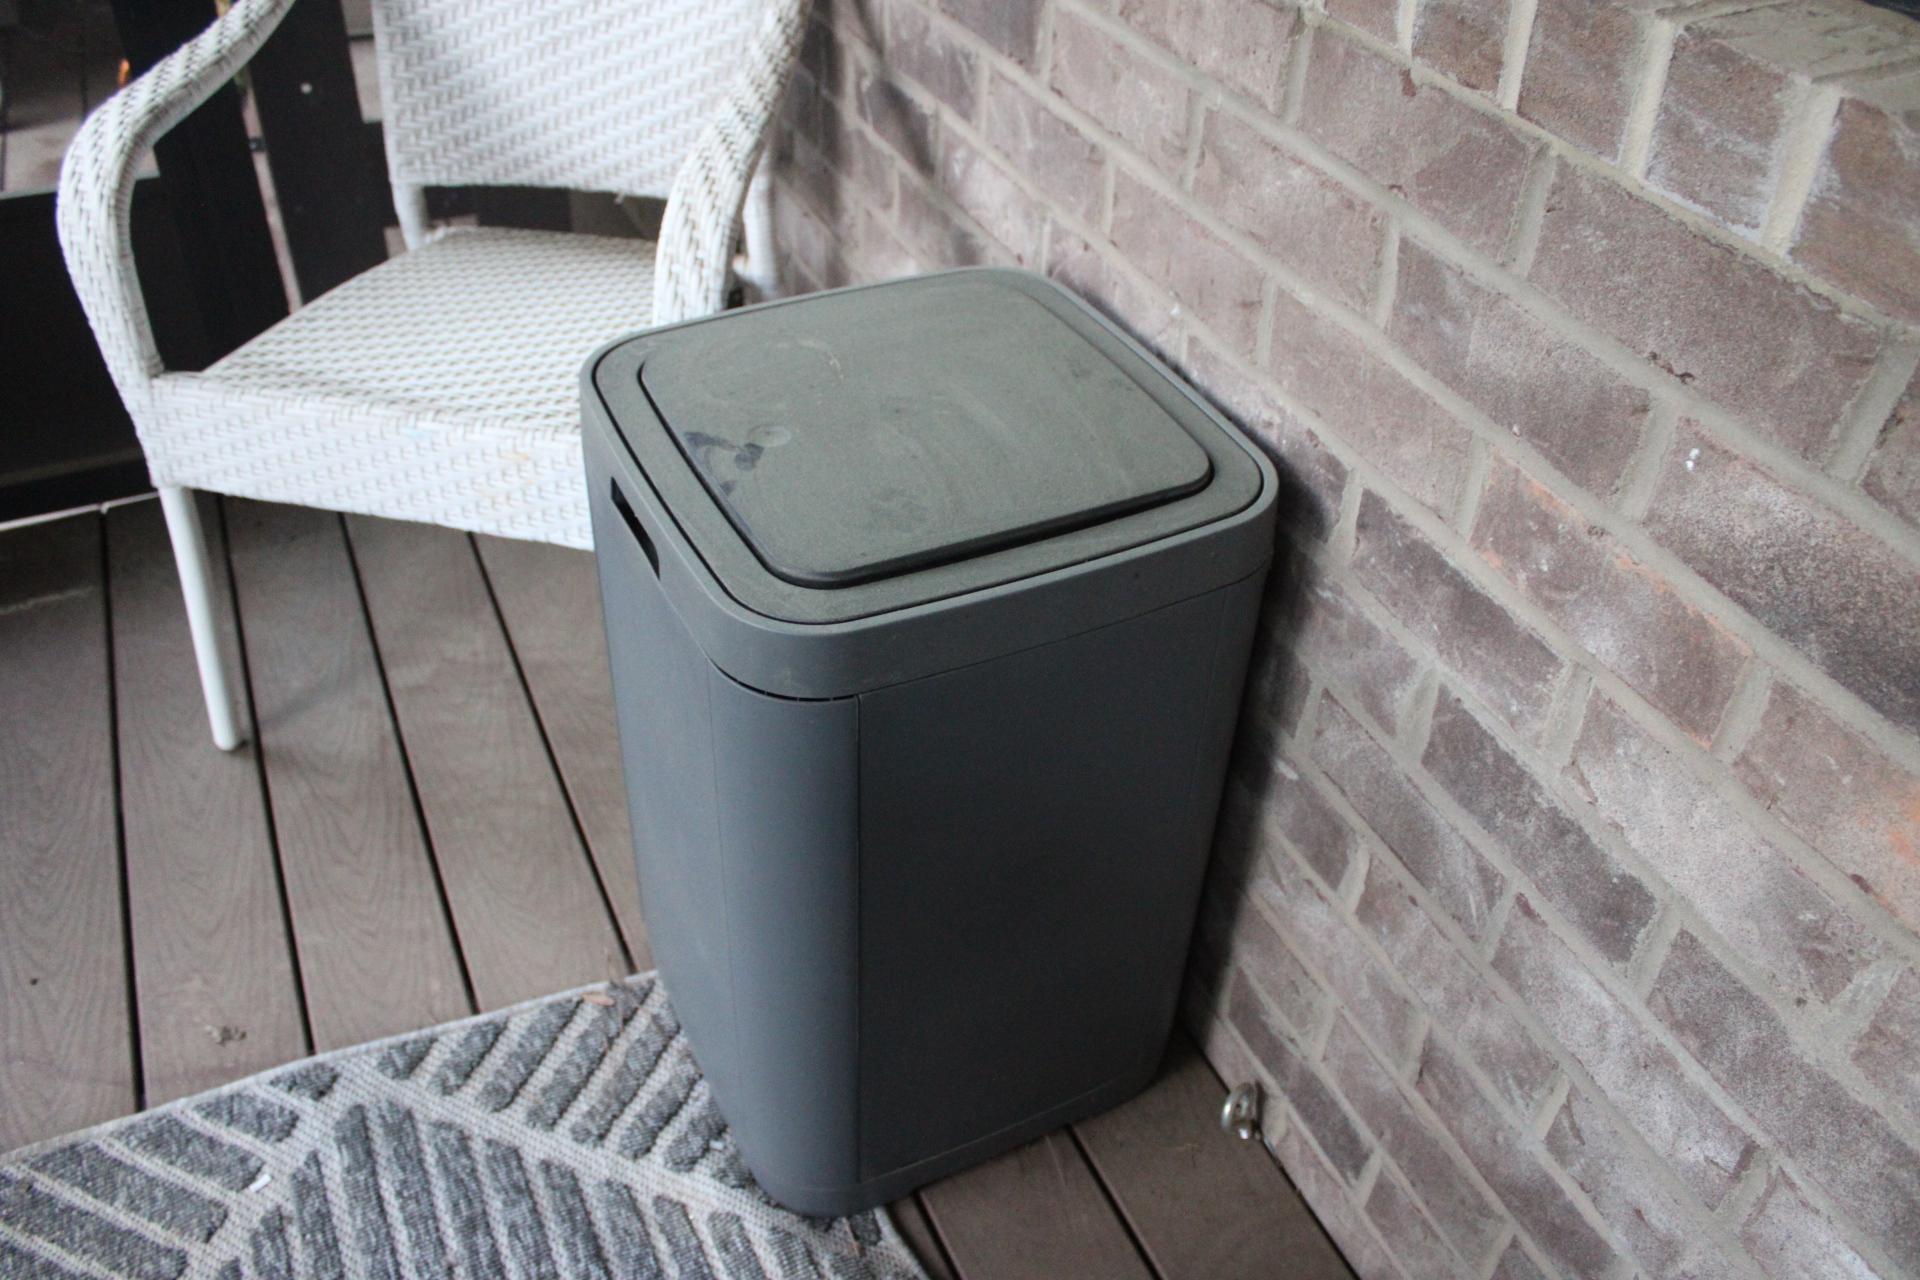 Patio furniture, Rug and Trash Can